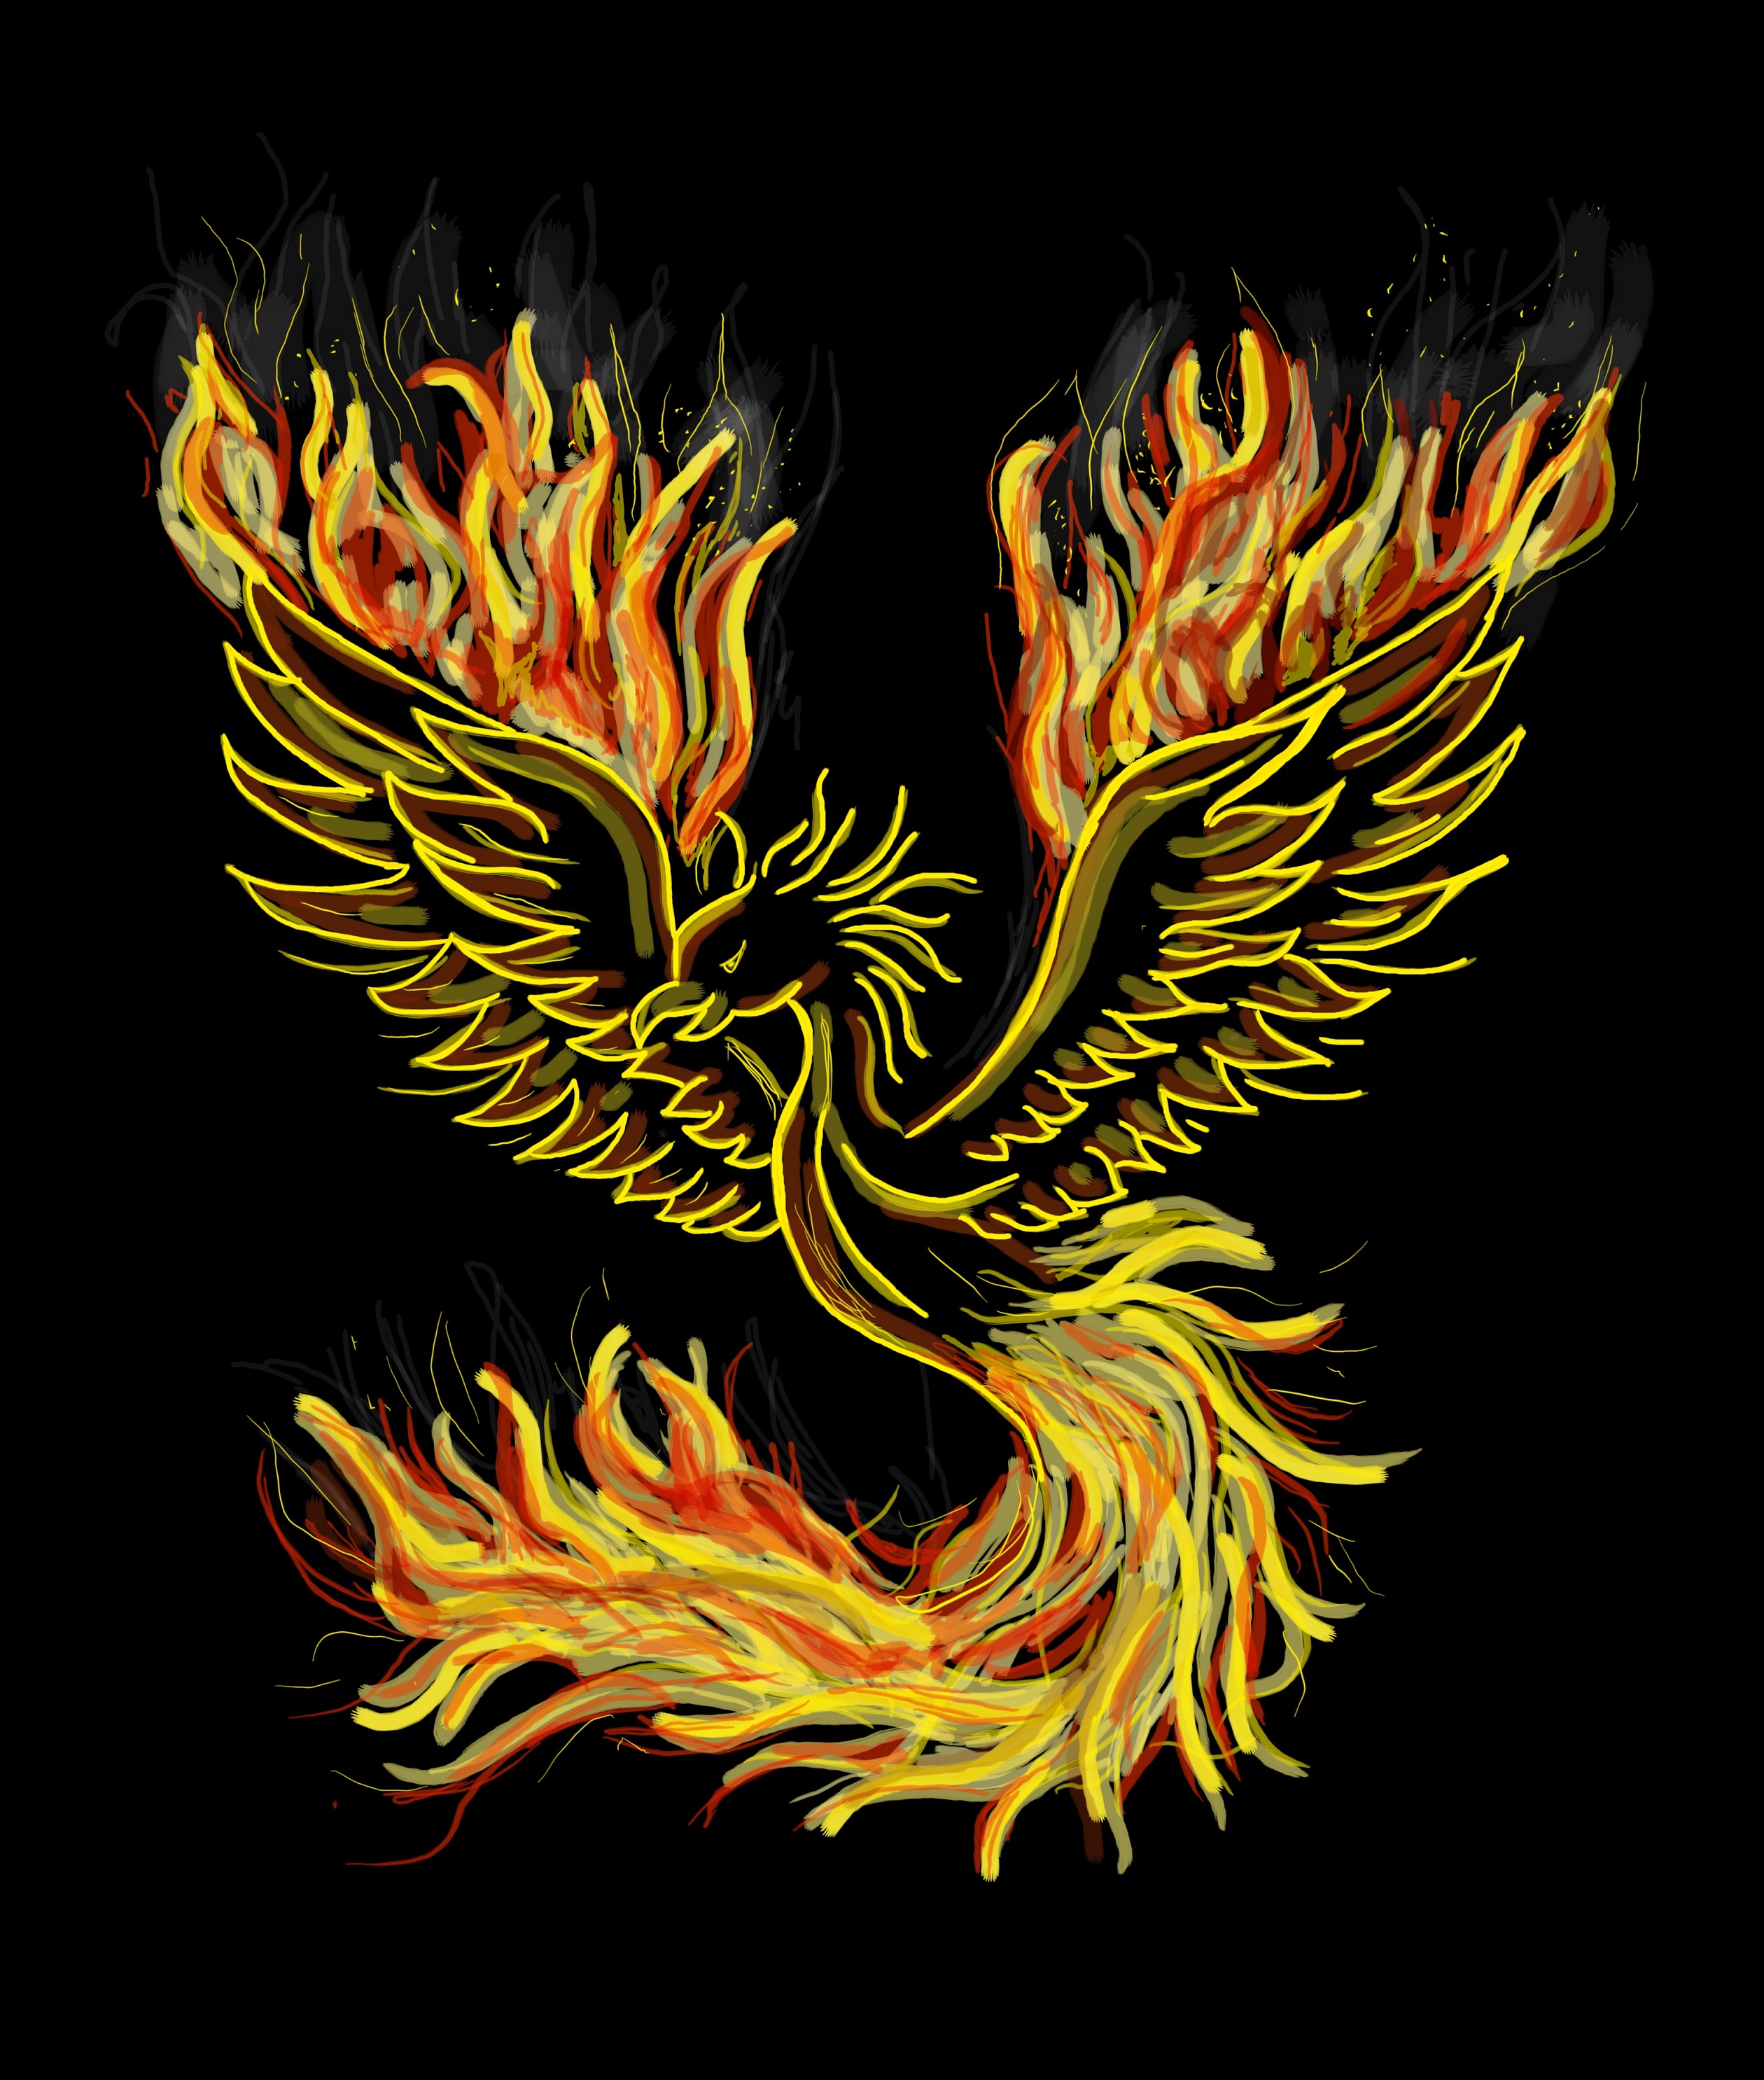 A Phoenix is a long-lived bird that is cyclically regenerated or reborn.